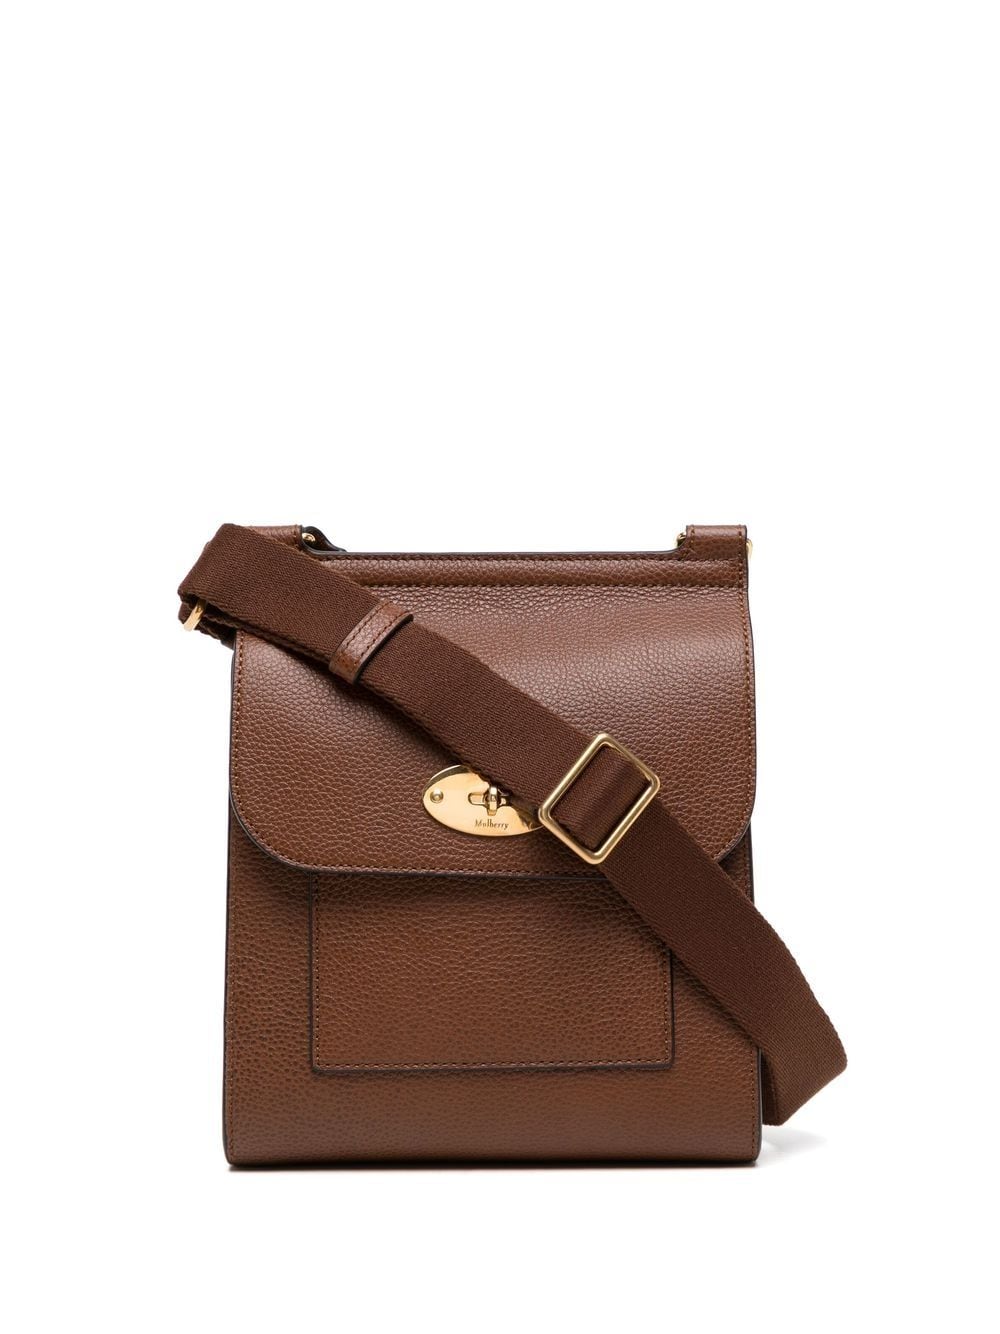 Mulberry small Antony leather crossbody bag - Brown von Mulberry